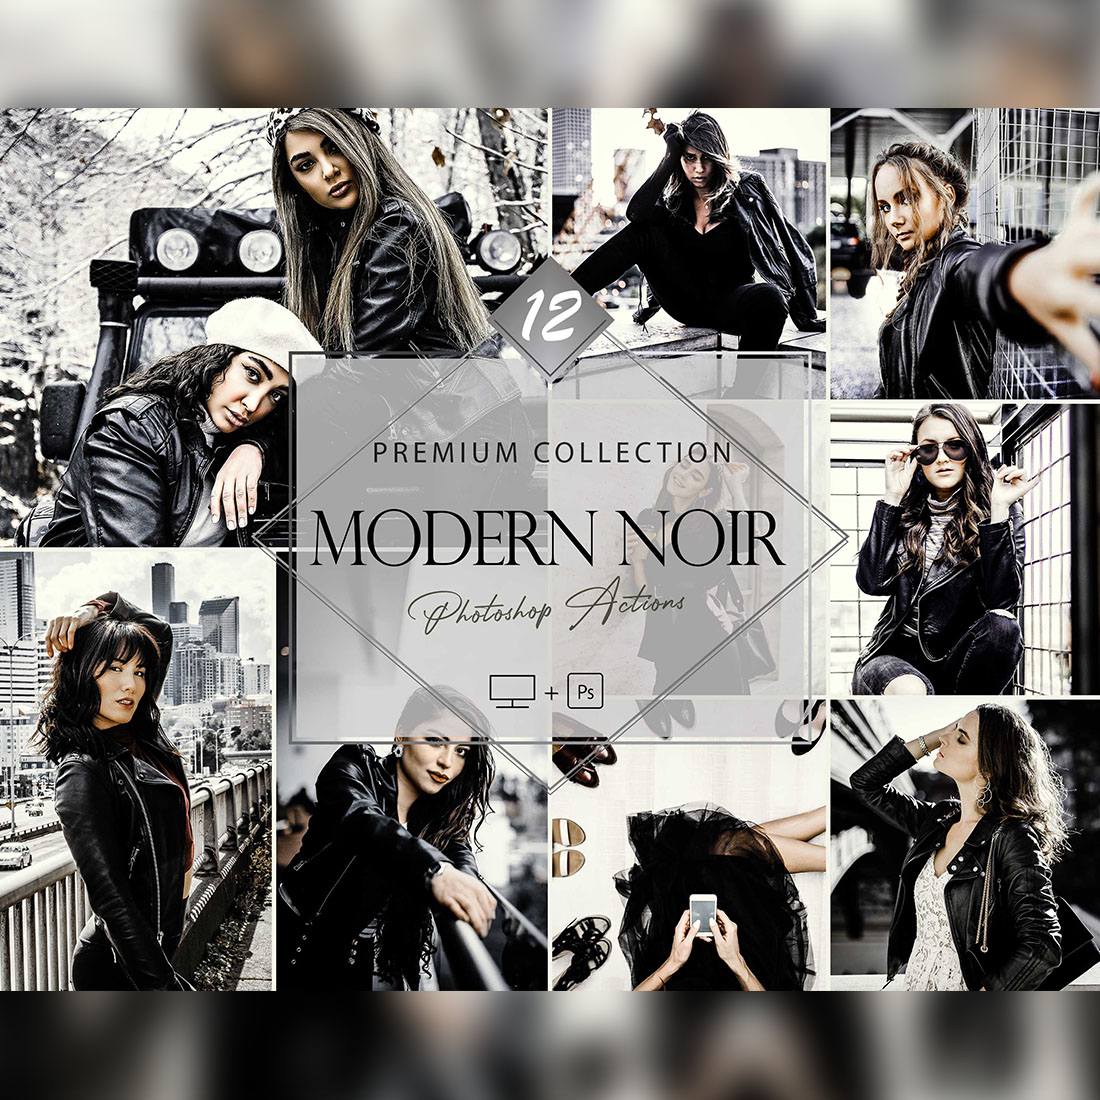 12 Modern Noir Photoshop Actions, Winter Fashion ACR Preset, Monochromatic Ps Filter, Portrait And Lifestyle Theme For Instagram, Blogger, Autumn Outdoor cover image.